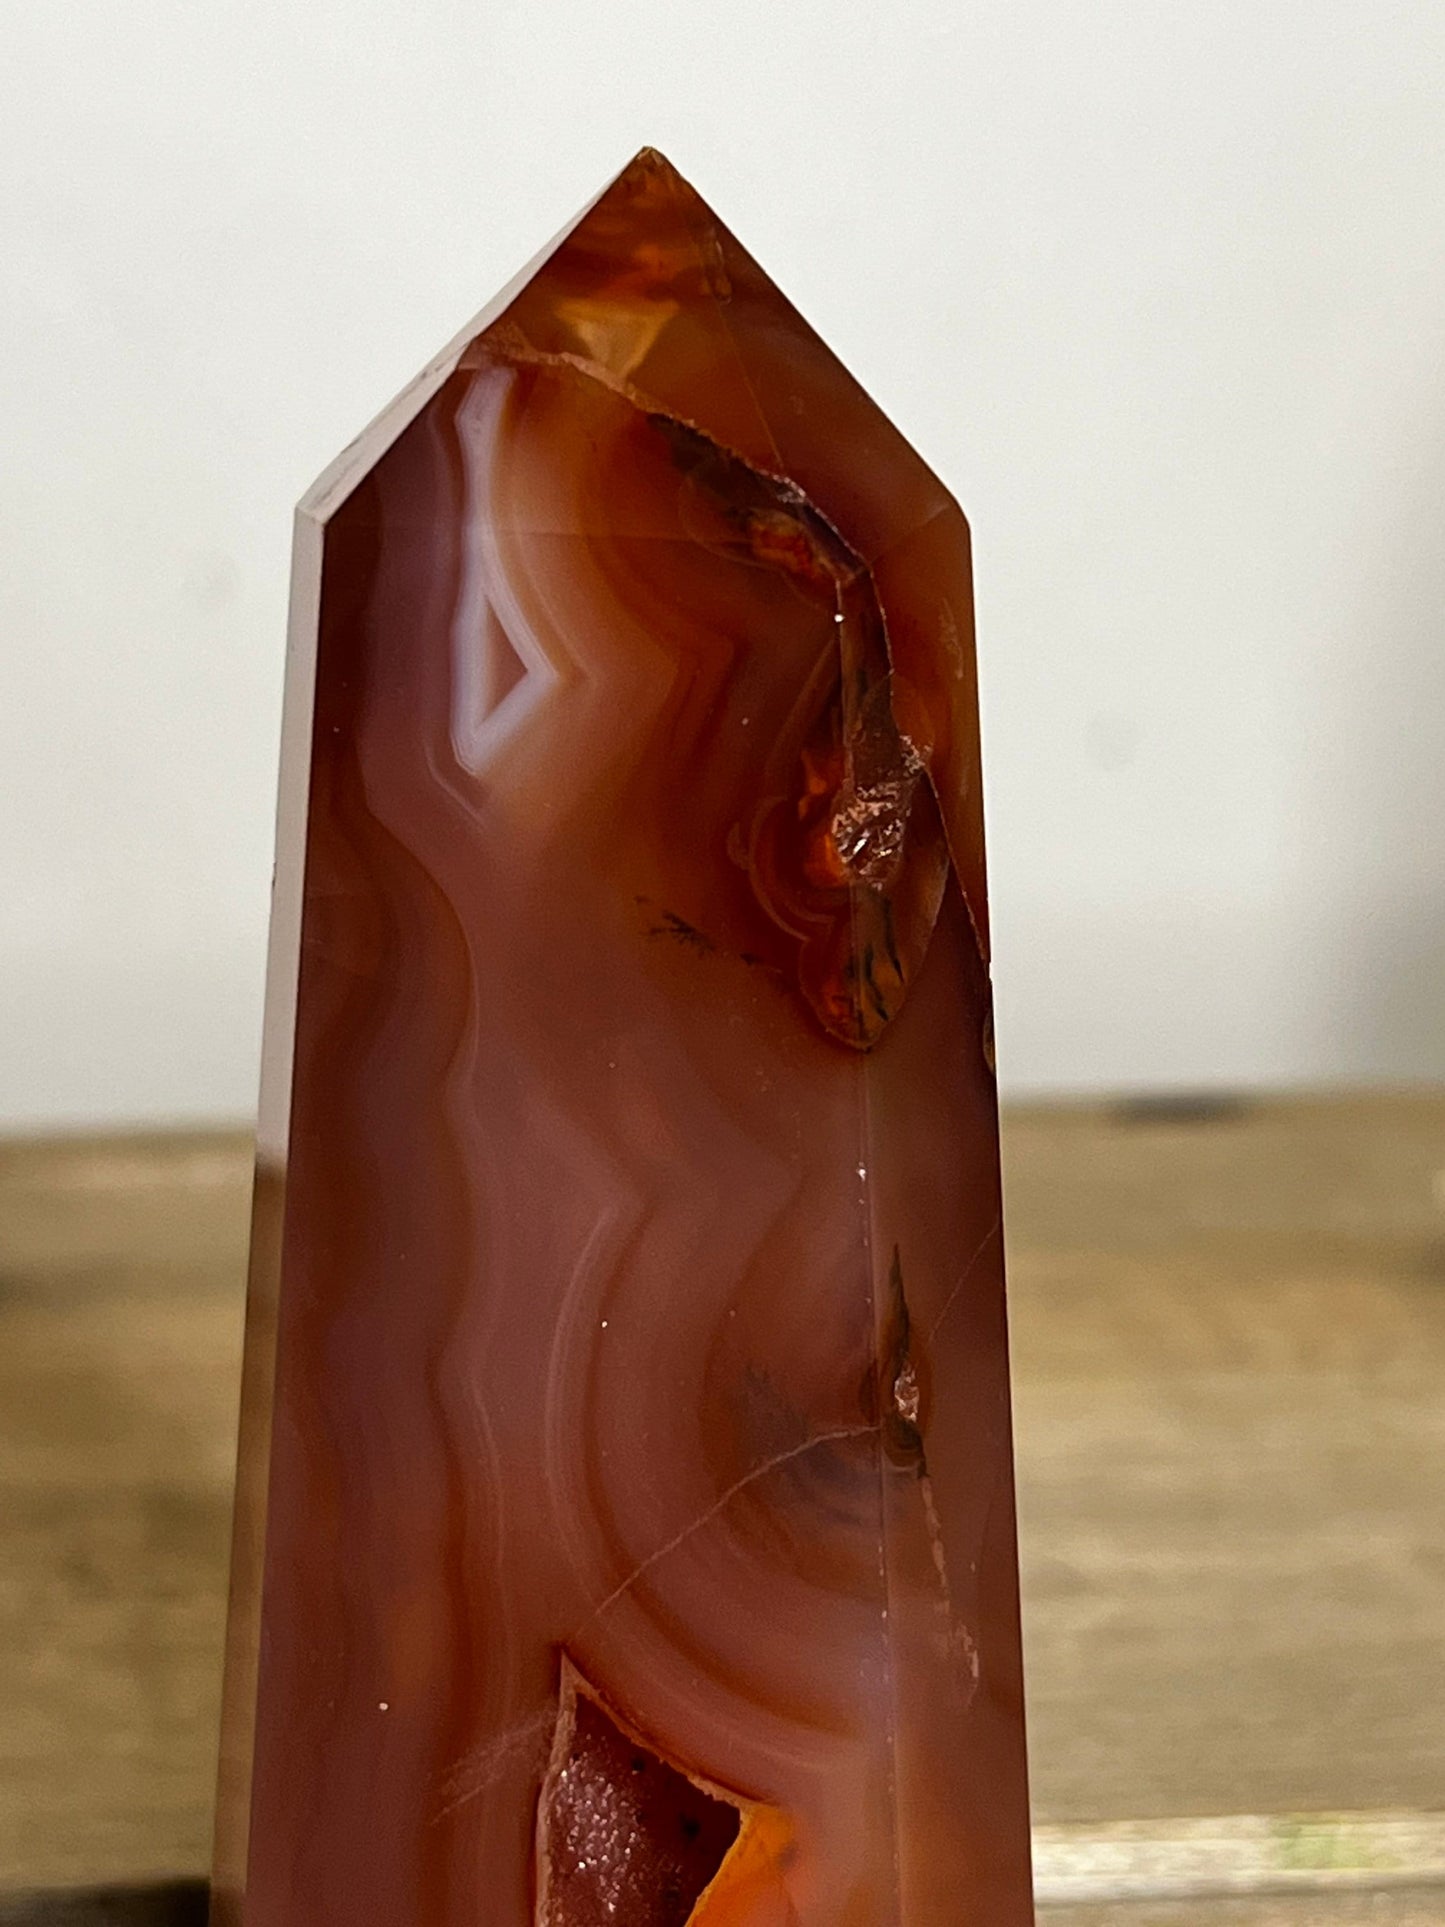 Carnelian Tower | Red Banded Carnelian Agate Tower 4.43” Tall